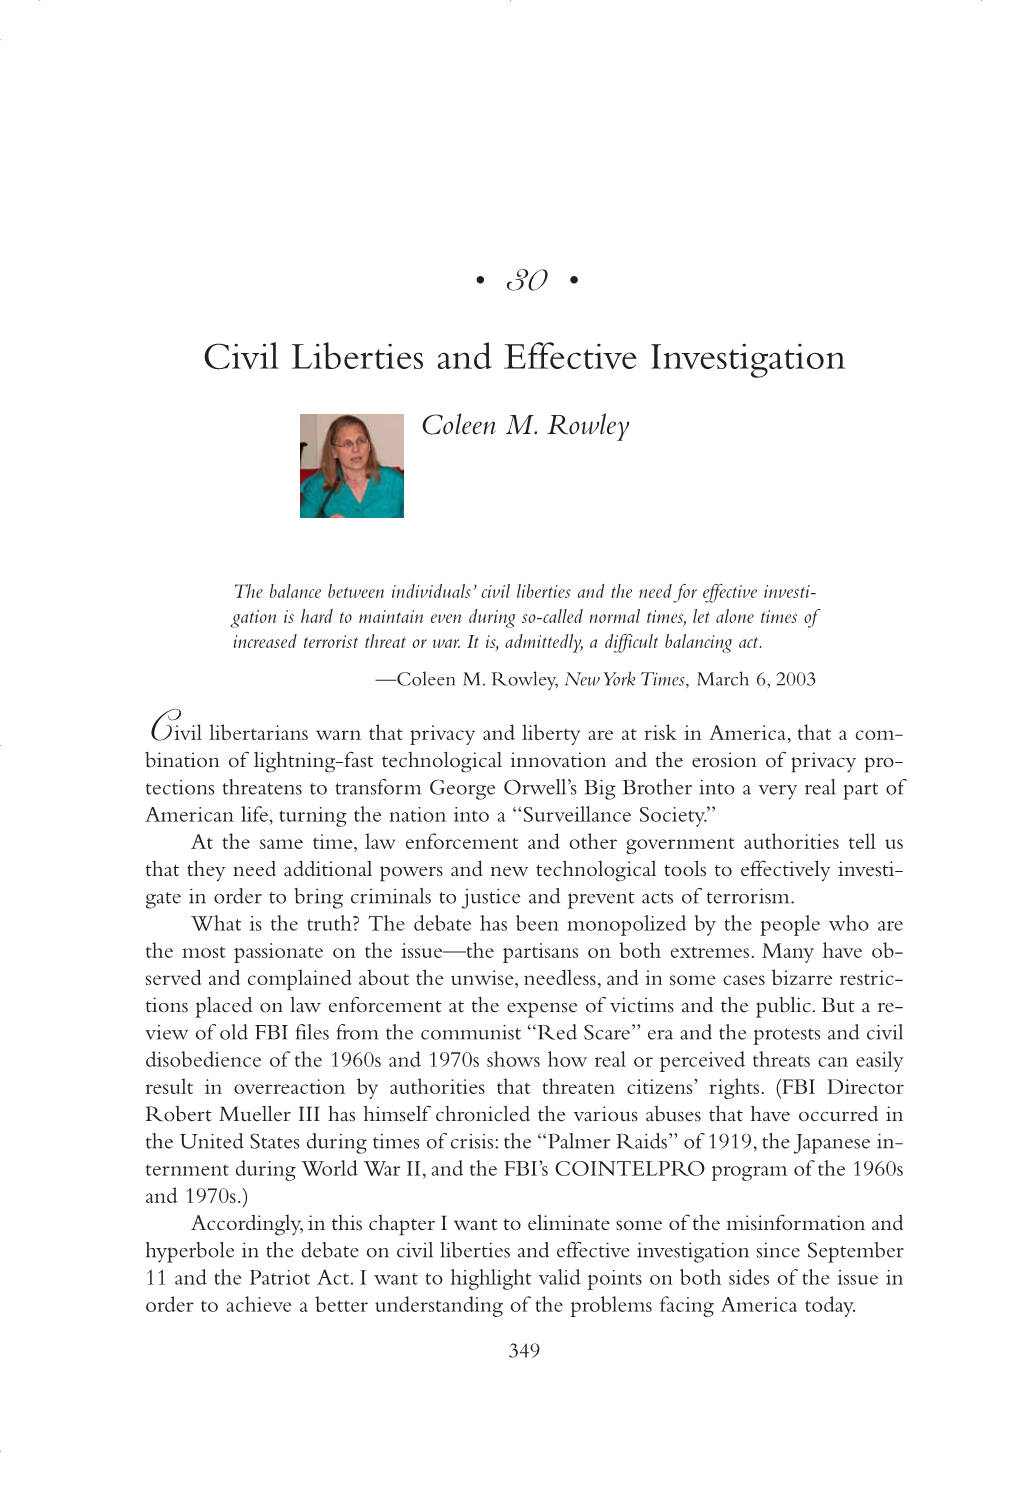 Civil Liberties and Effective Investigation